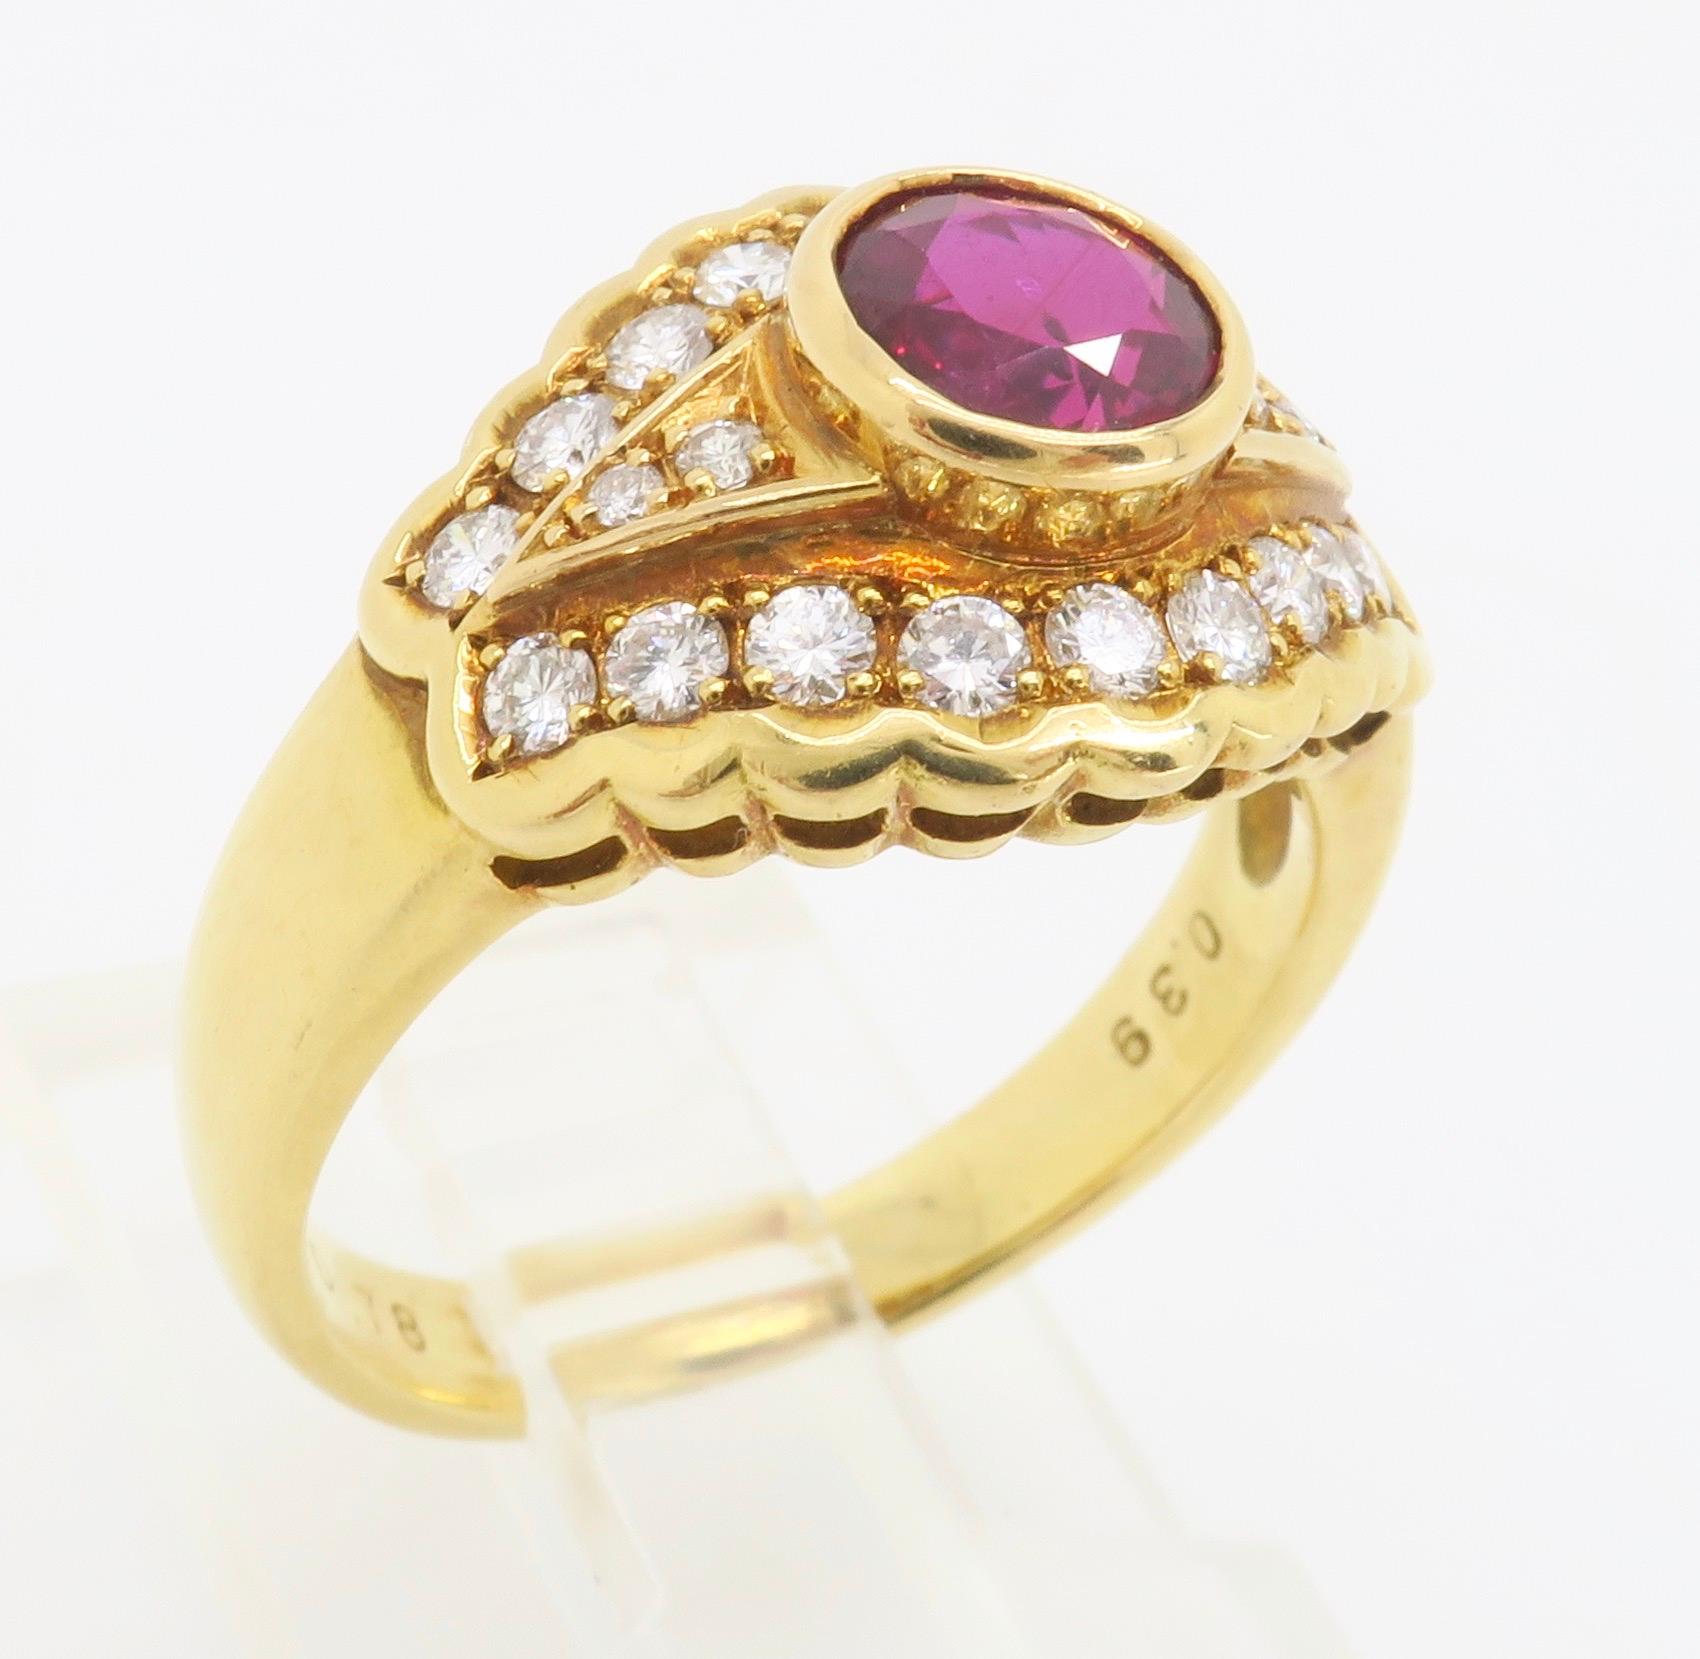 Ruby & Diamond Ring Made in 18k Yellow Gold 3